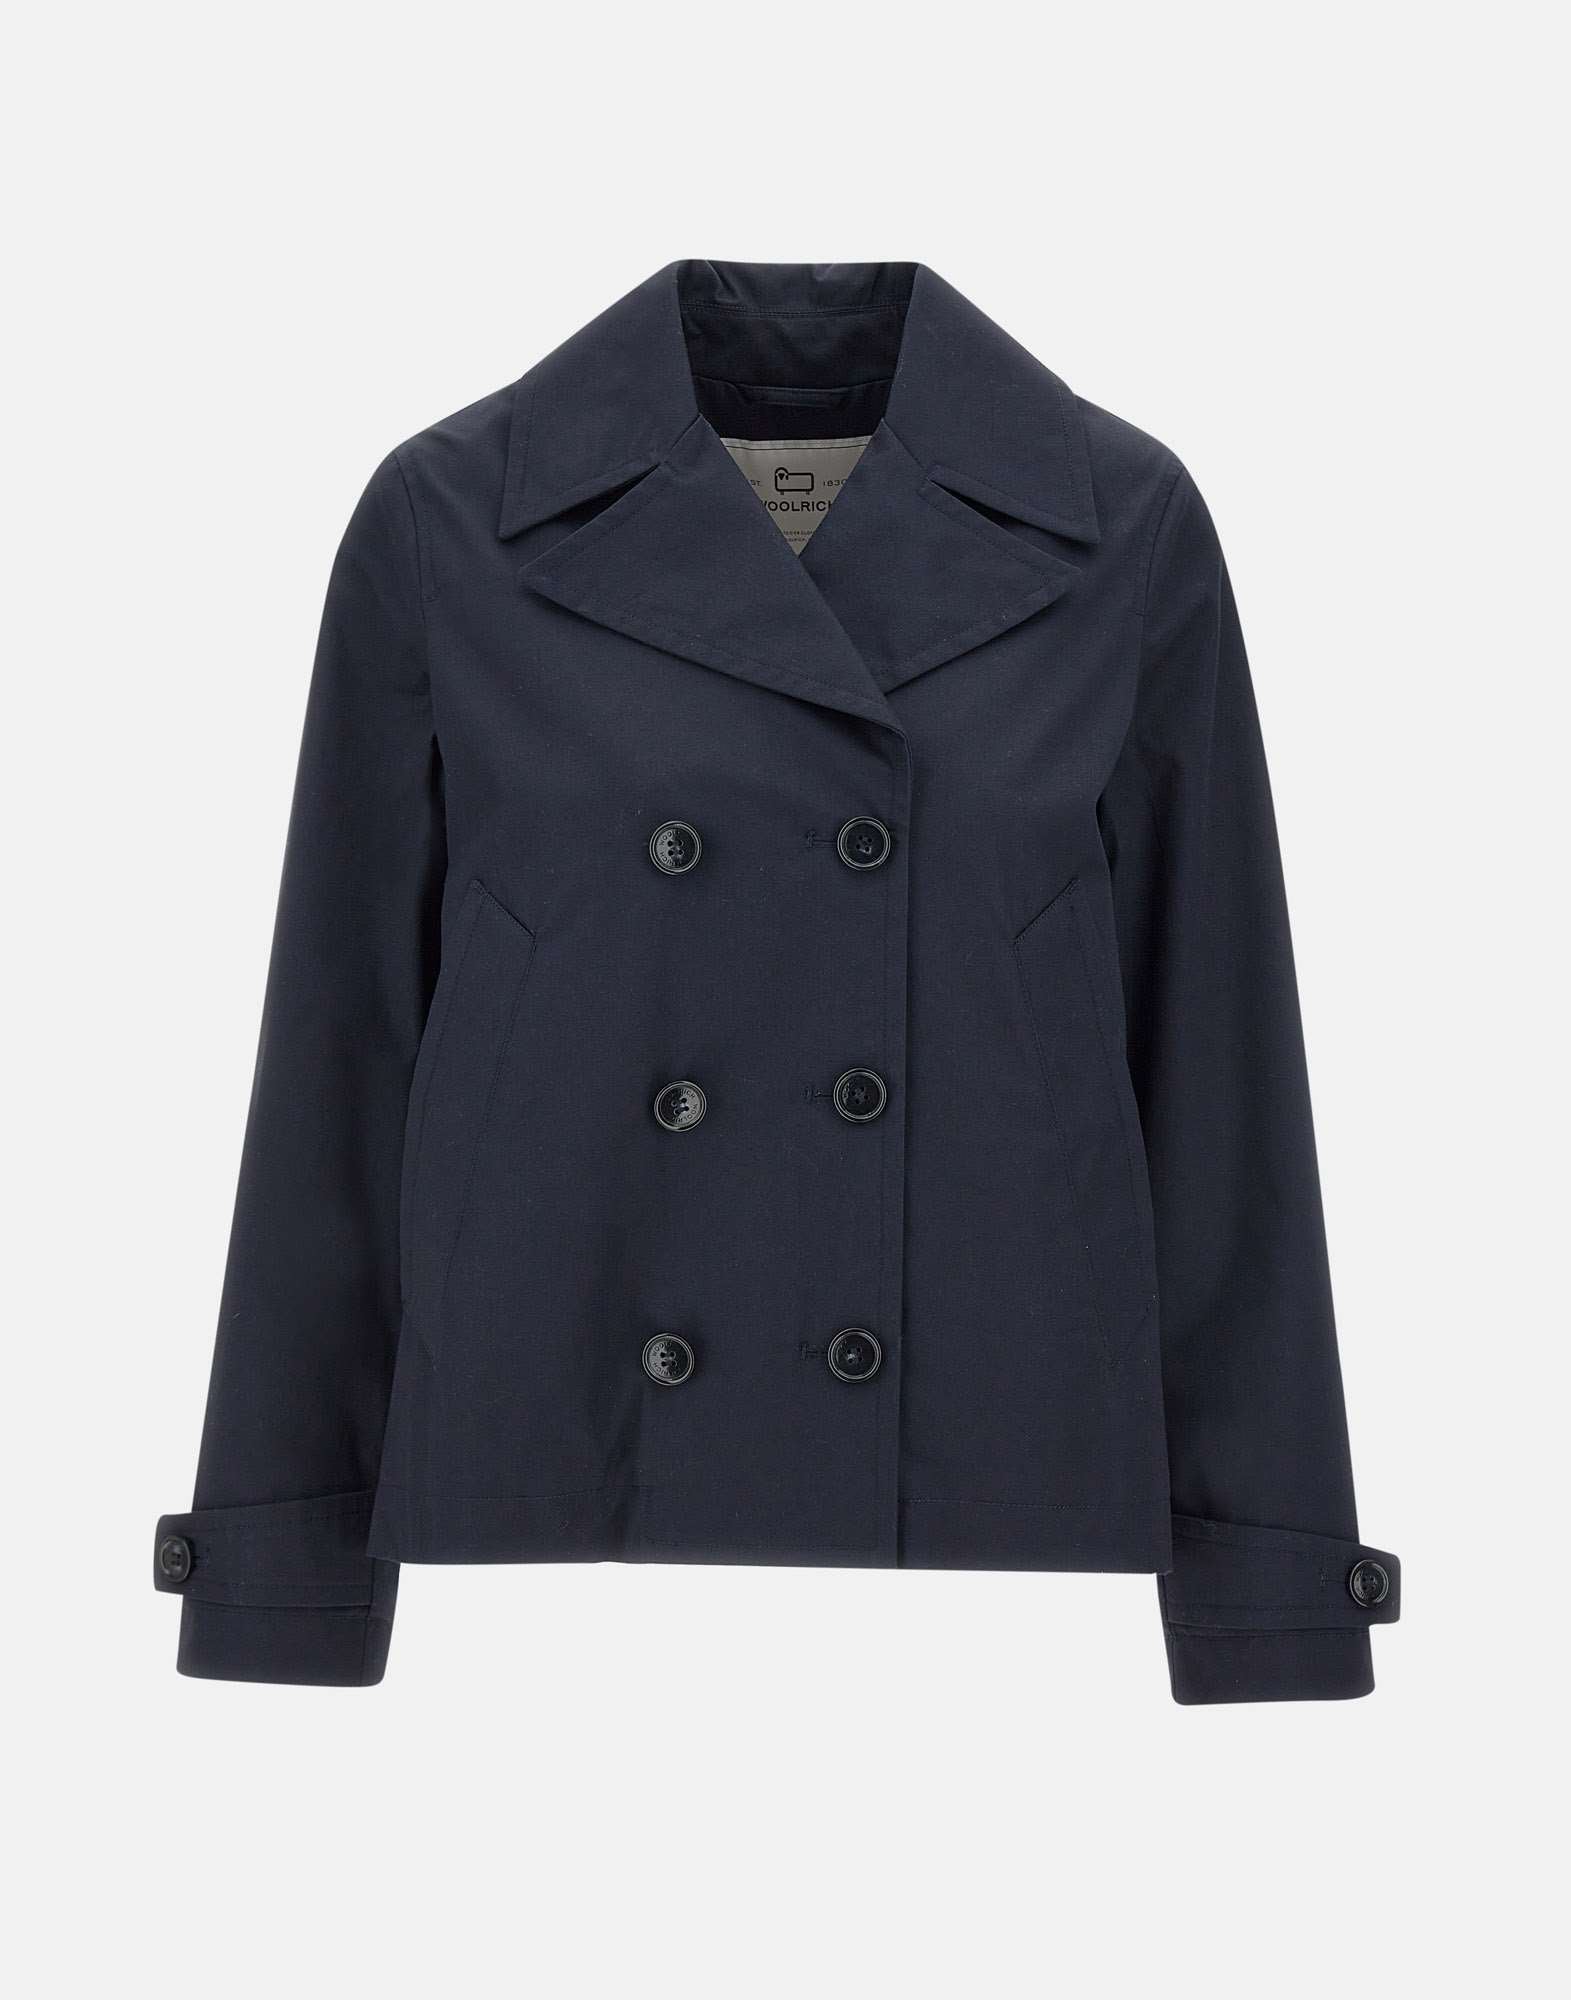 Woolrich Havice Classic Twill Cotton Jacket Navy Blue